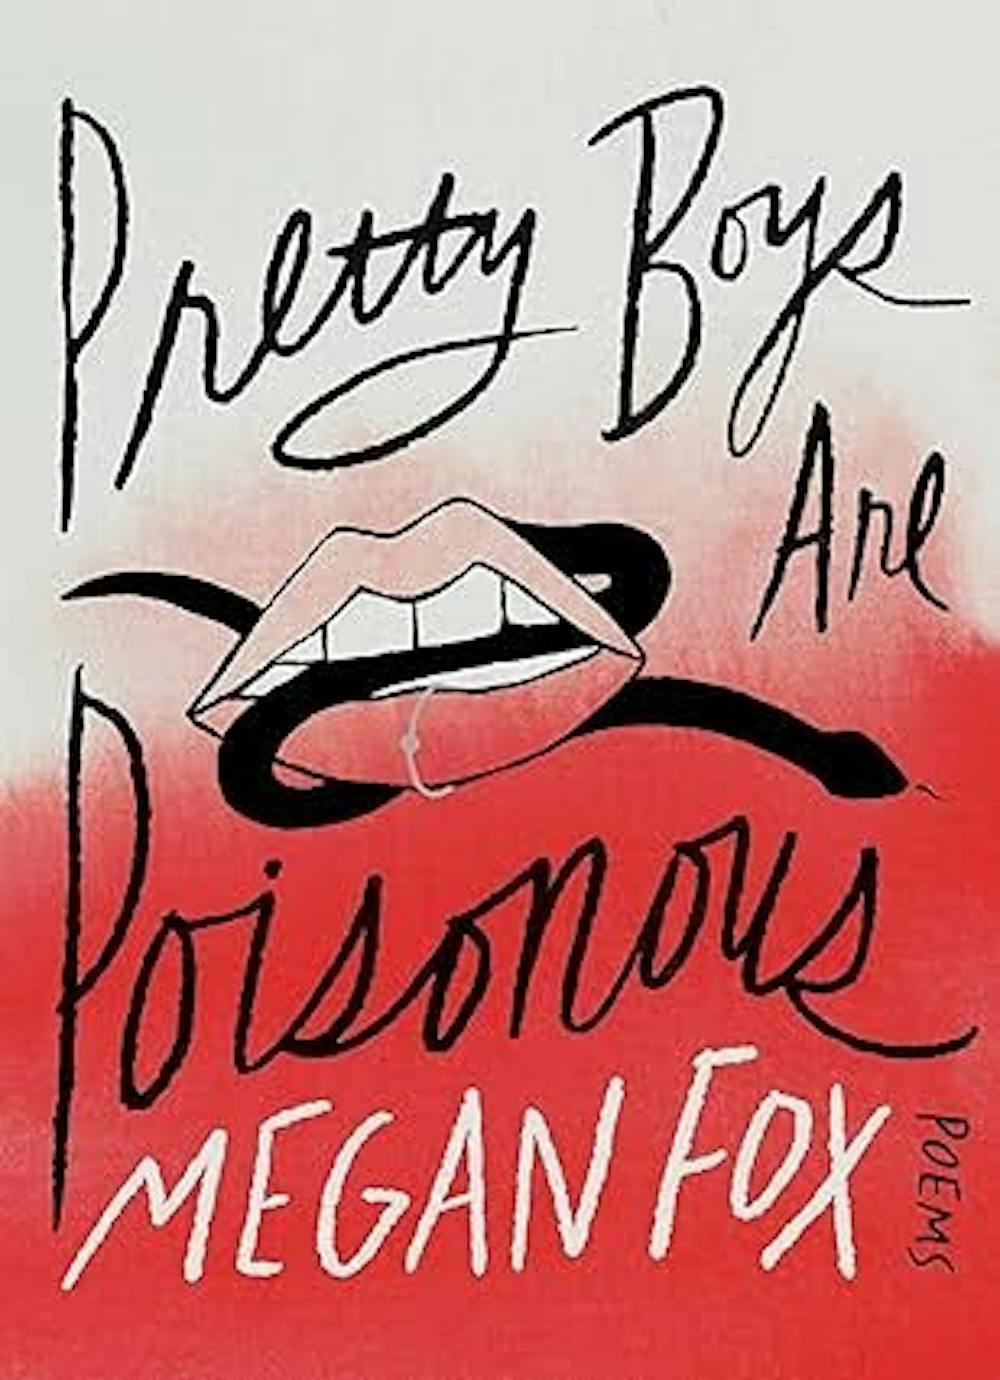 <p><em>Featuring seven intimate chapters, actress Megan Fox shows a new side of herself through poetry. (Photo courtesy of </em><a href="https://www.amazon.com/Pretty-Boys-Are-Poisonous-Poems/dp/1668050412" target=""><em>Amazon Books</em></a><em>)</em></p>